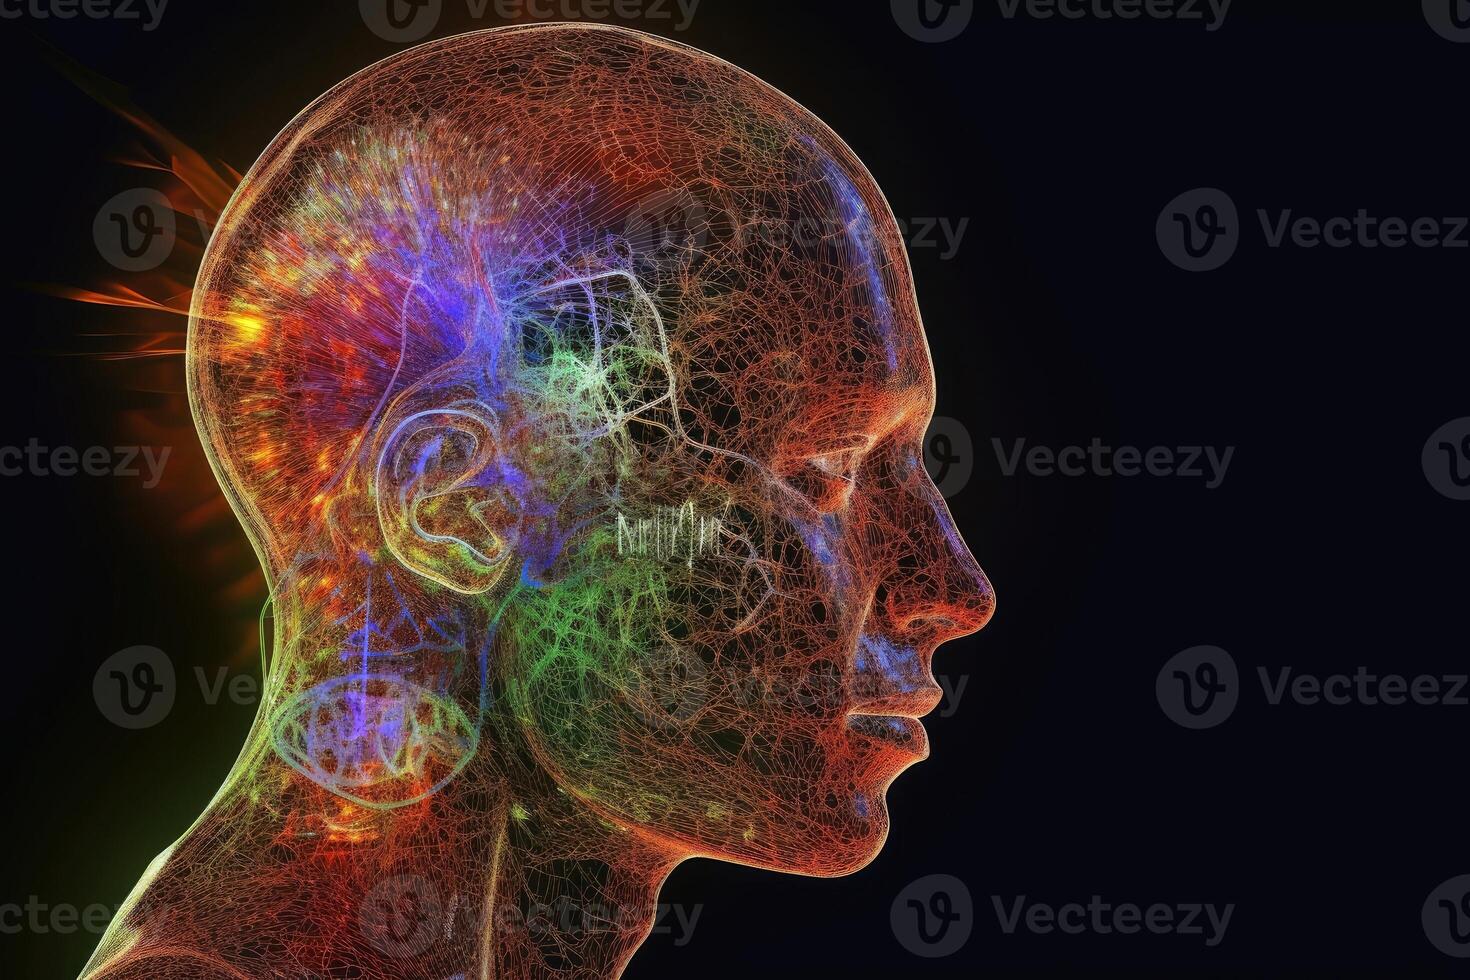 Visualization of the human genom created with technology. photo